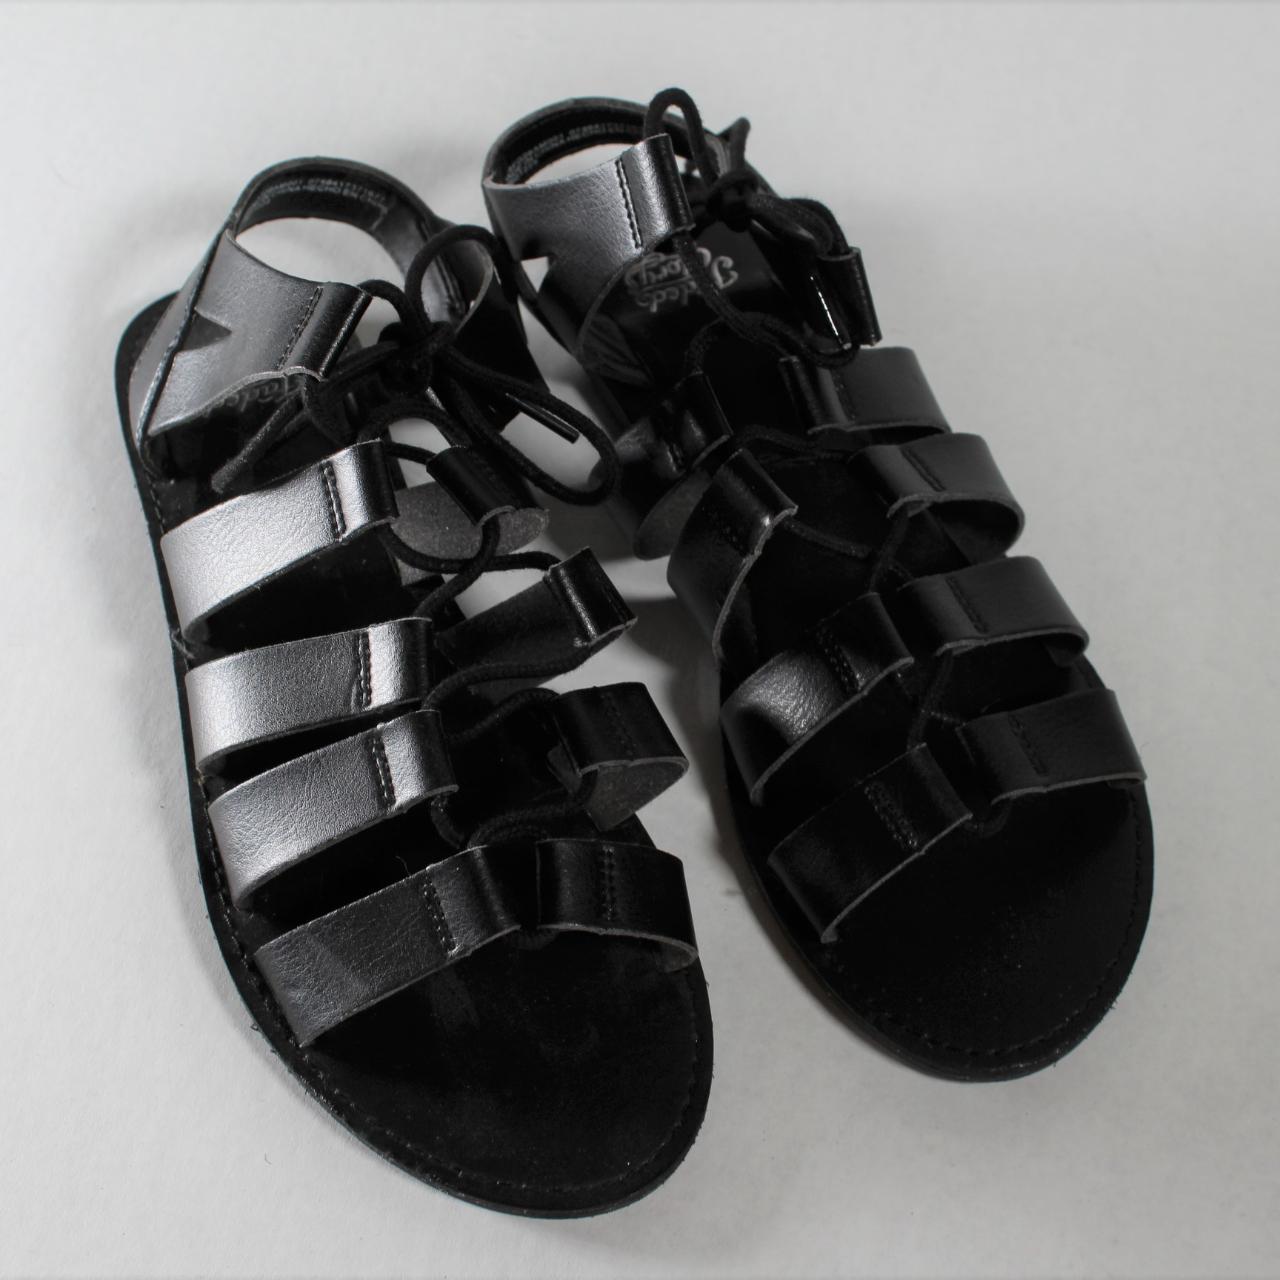 Classic 90s style Black Lace Up Sandal, can be worn... - Depop